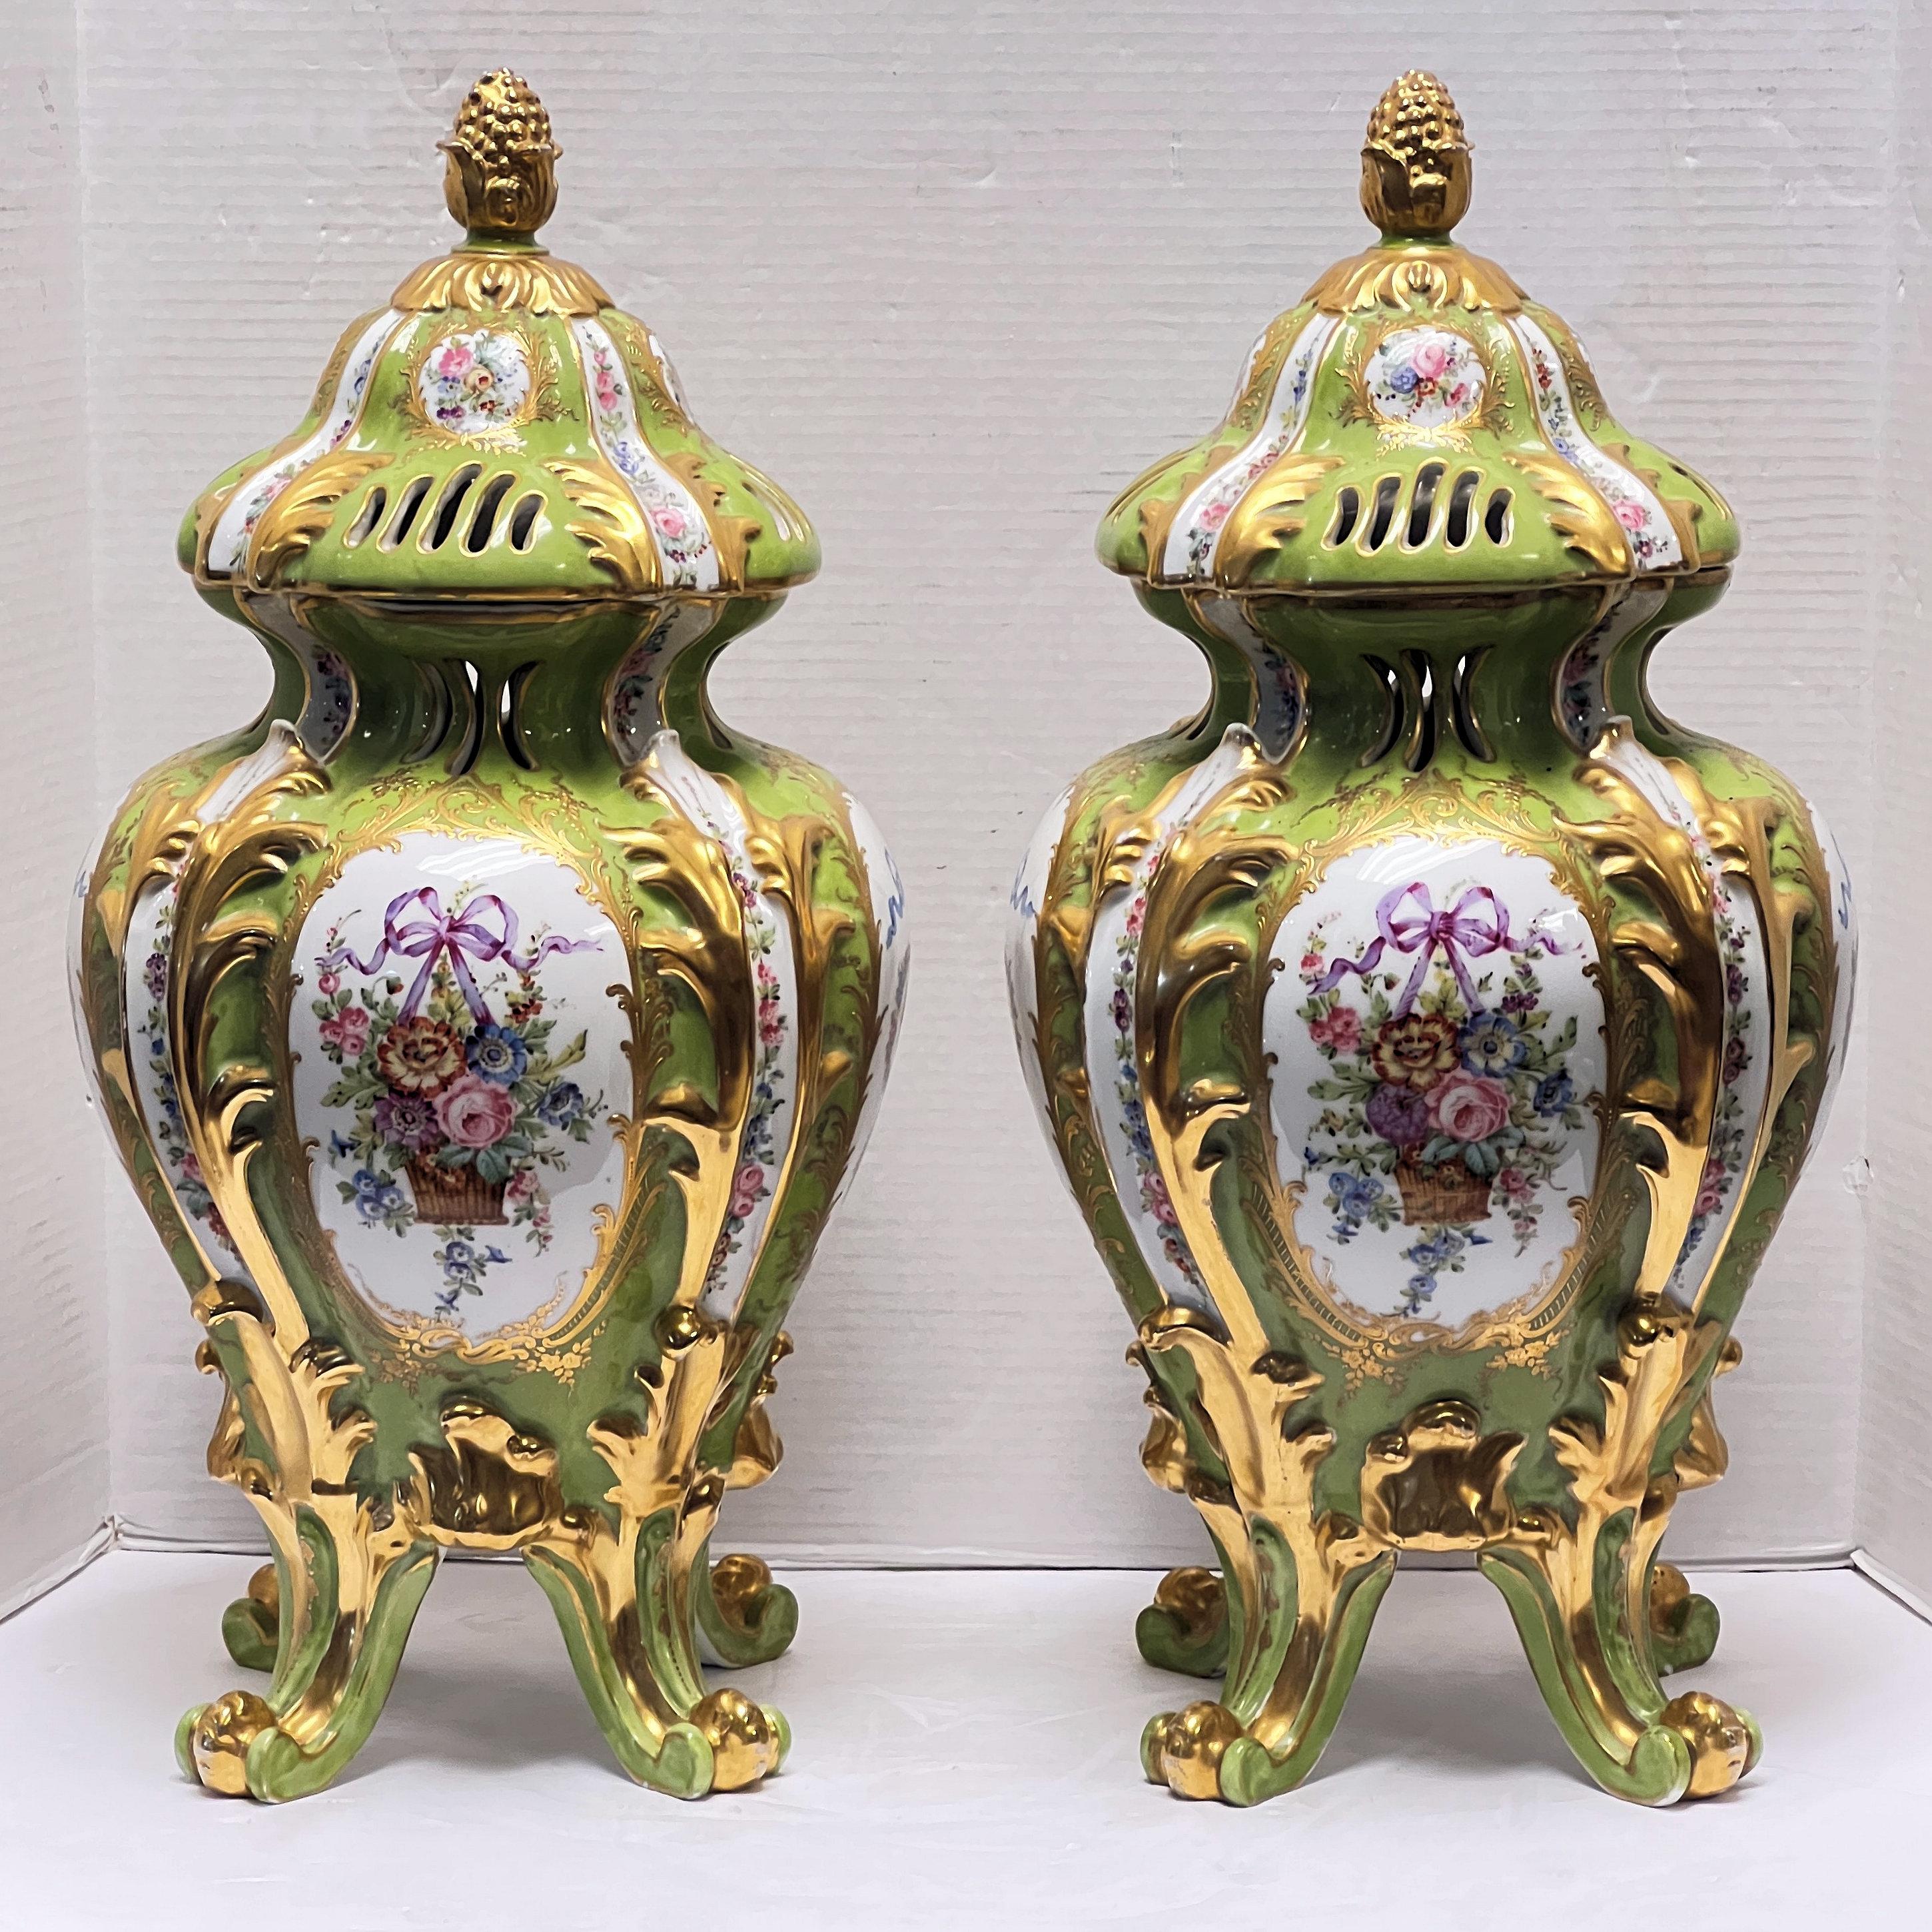 Pair of very unusual turn of the century Green color Sevres Style Floral Painted and Gilded Porcelain Urns.